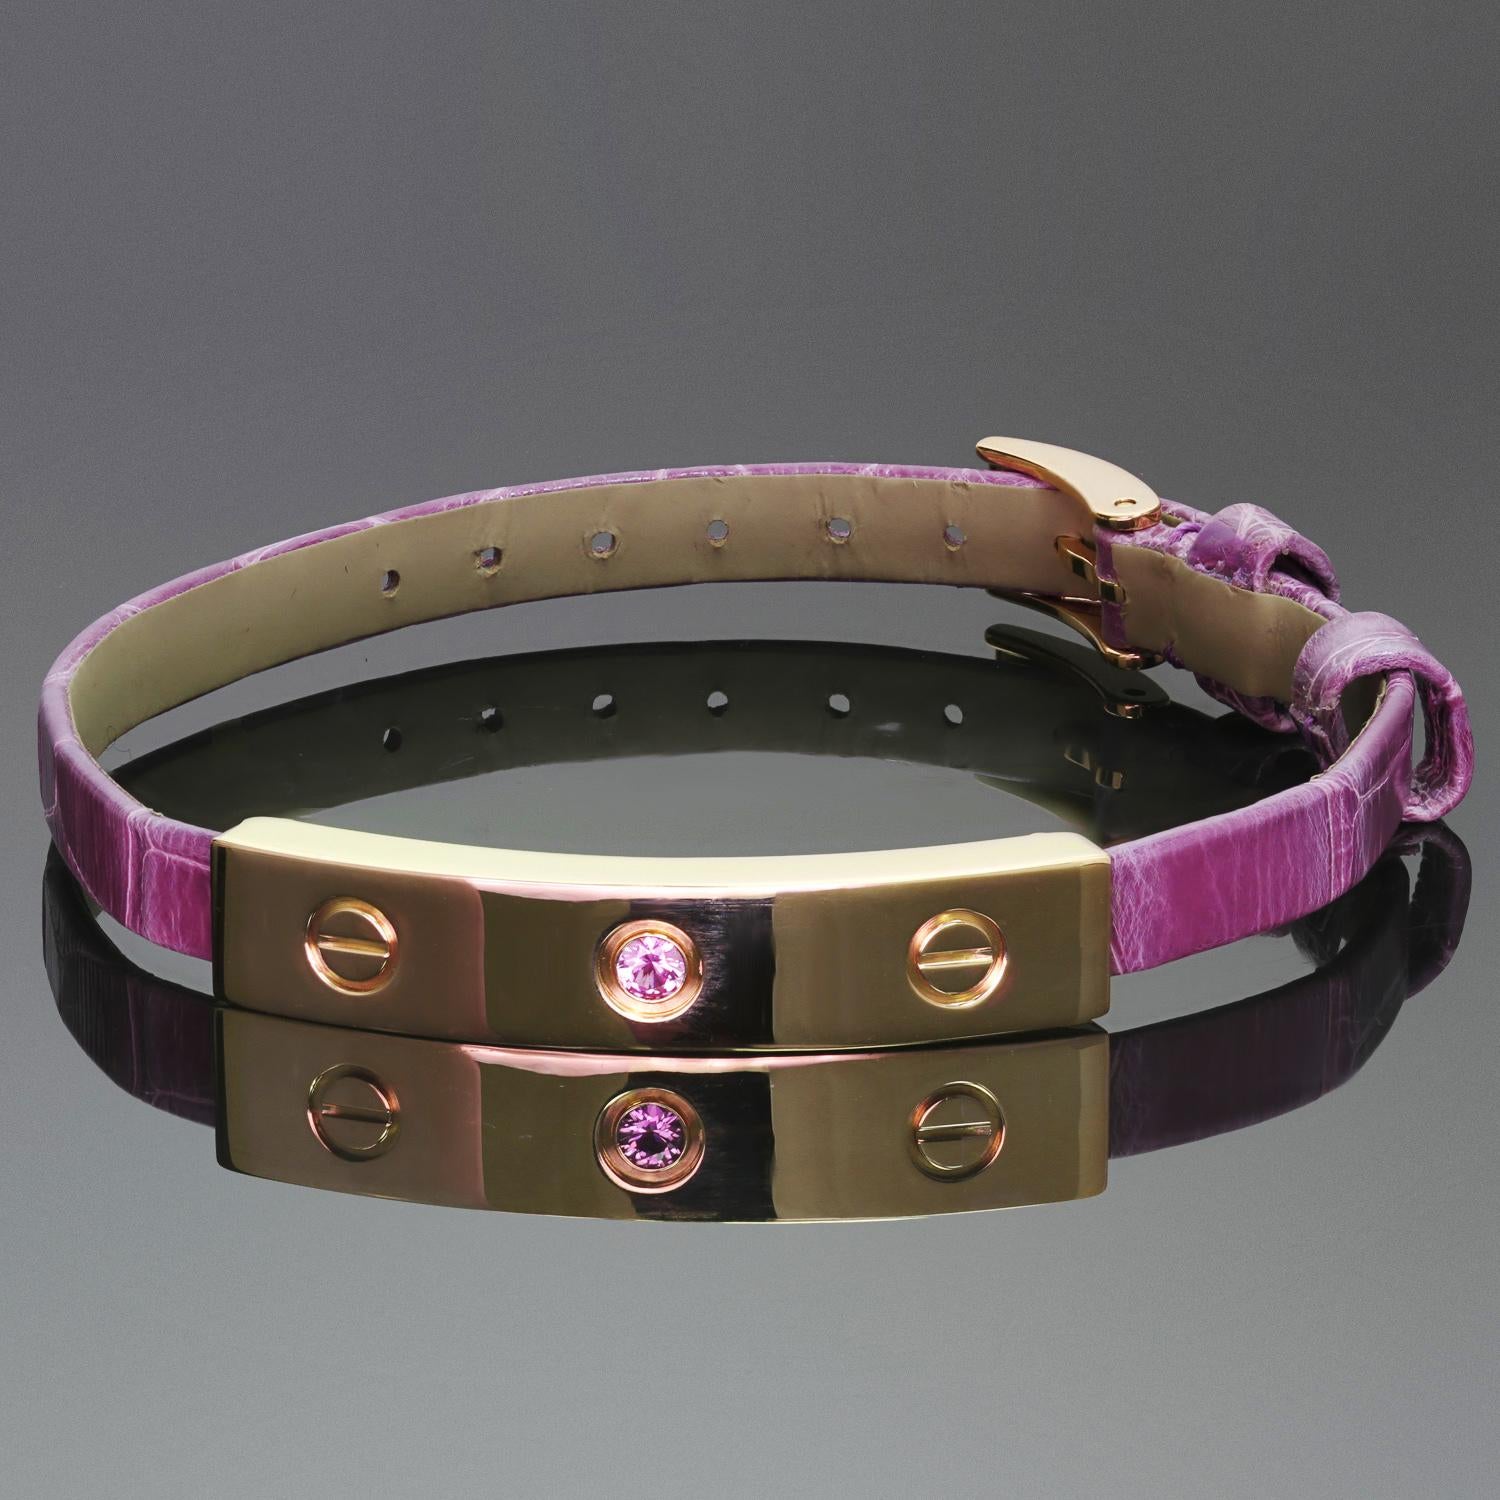 This gorgeous Cartier bracelet from the iconic Love collection features a slide bar crafted in 18k rose gold and set with a round purple-pink sapphire, completed with a mauve crocodile leather strap and a gold clasp. The strap has an adjustable